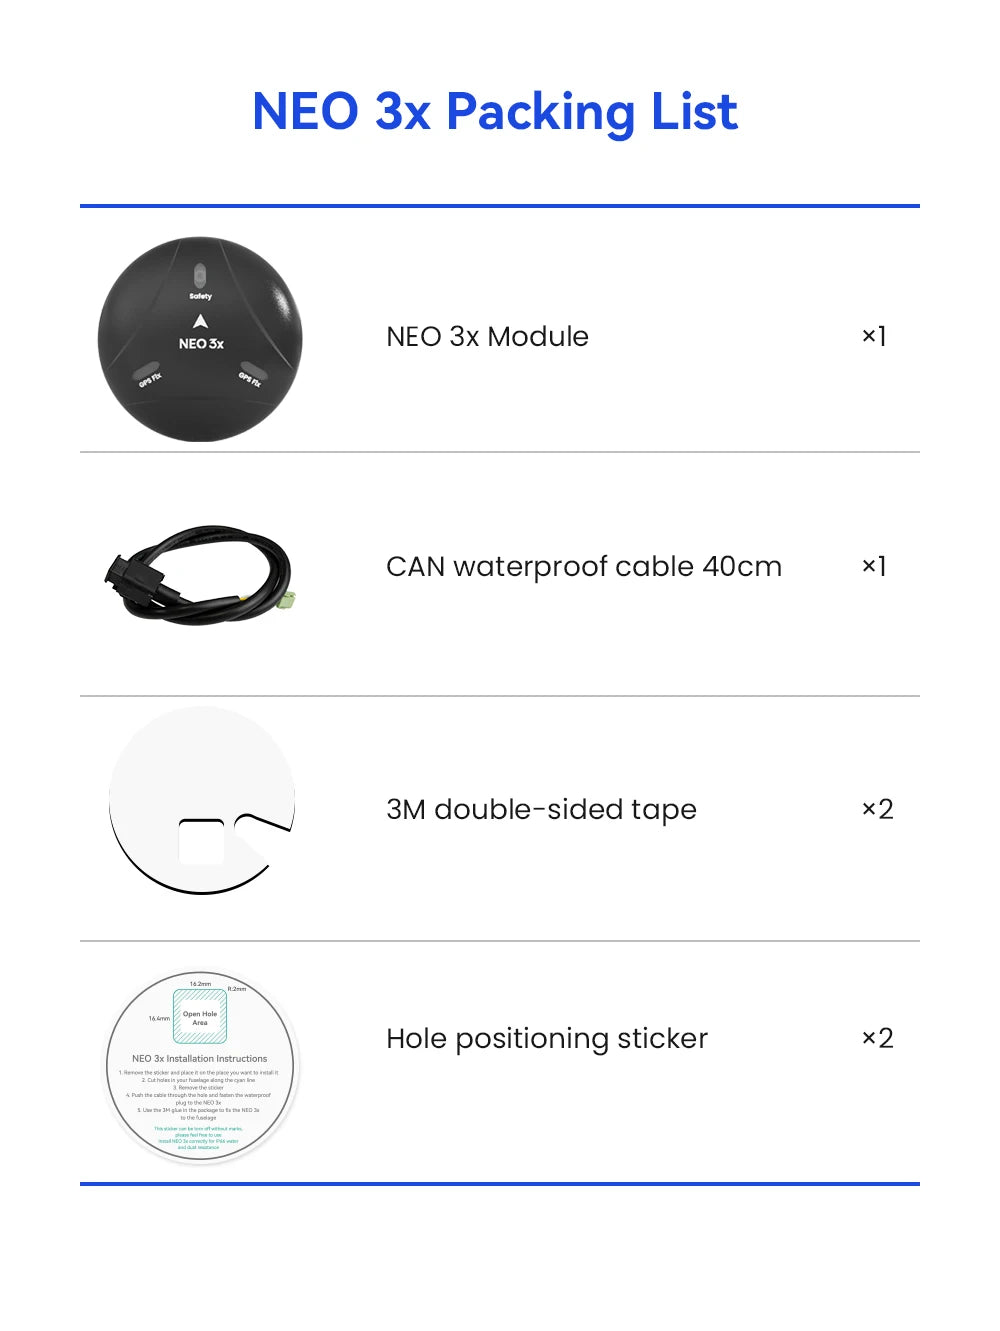 CUAV New NEO 3X GPS, CAN waterproof cable 4Ocm x] 3M double-sided tape x